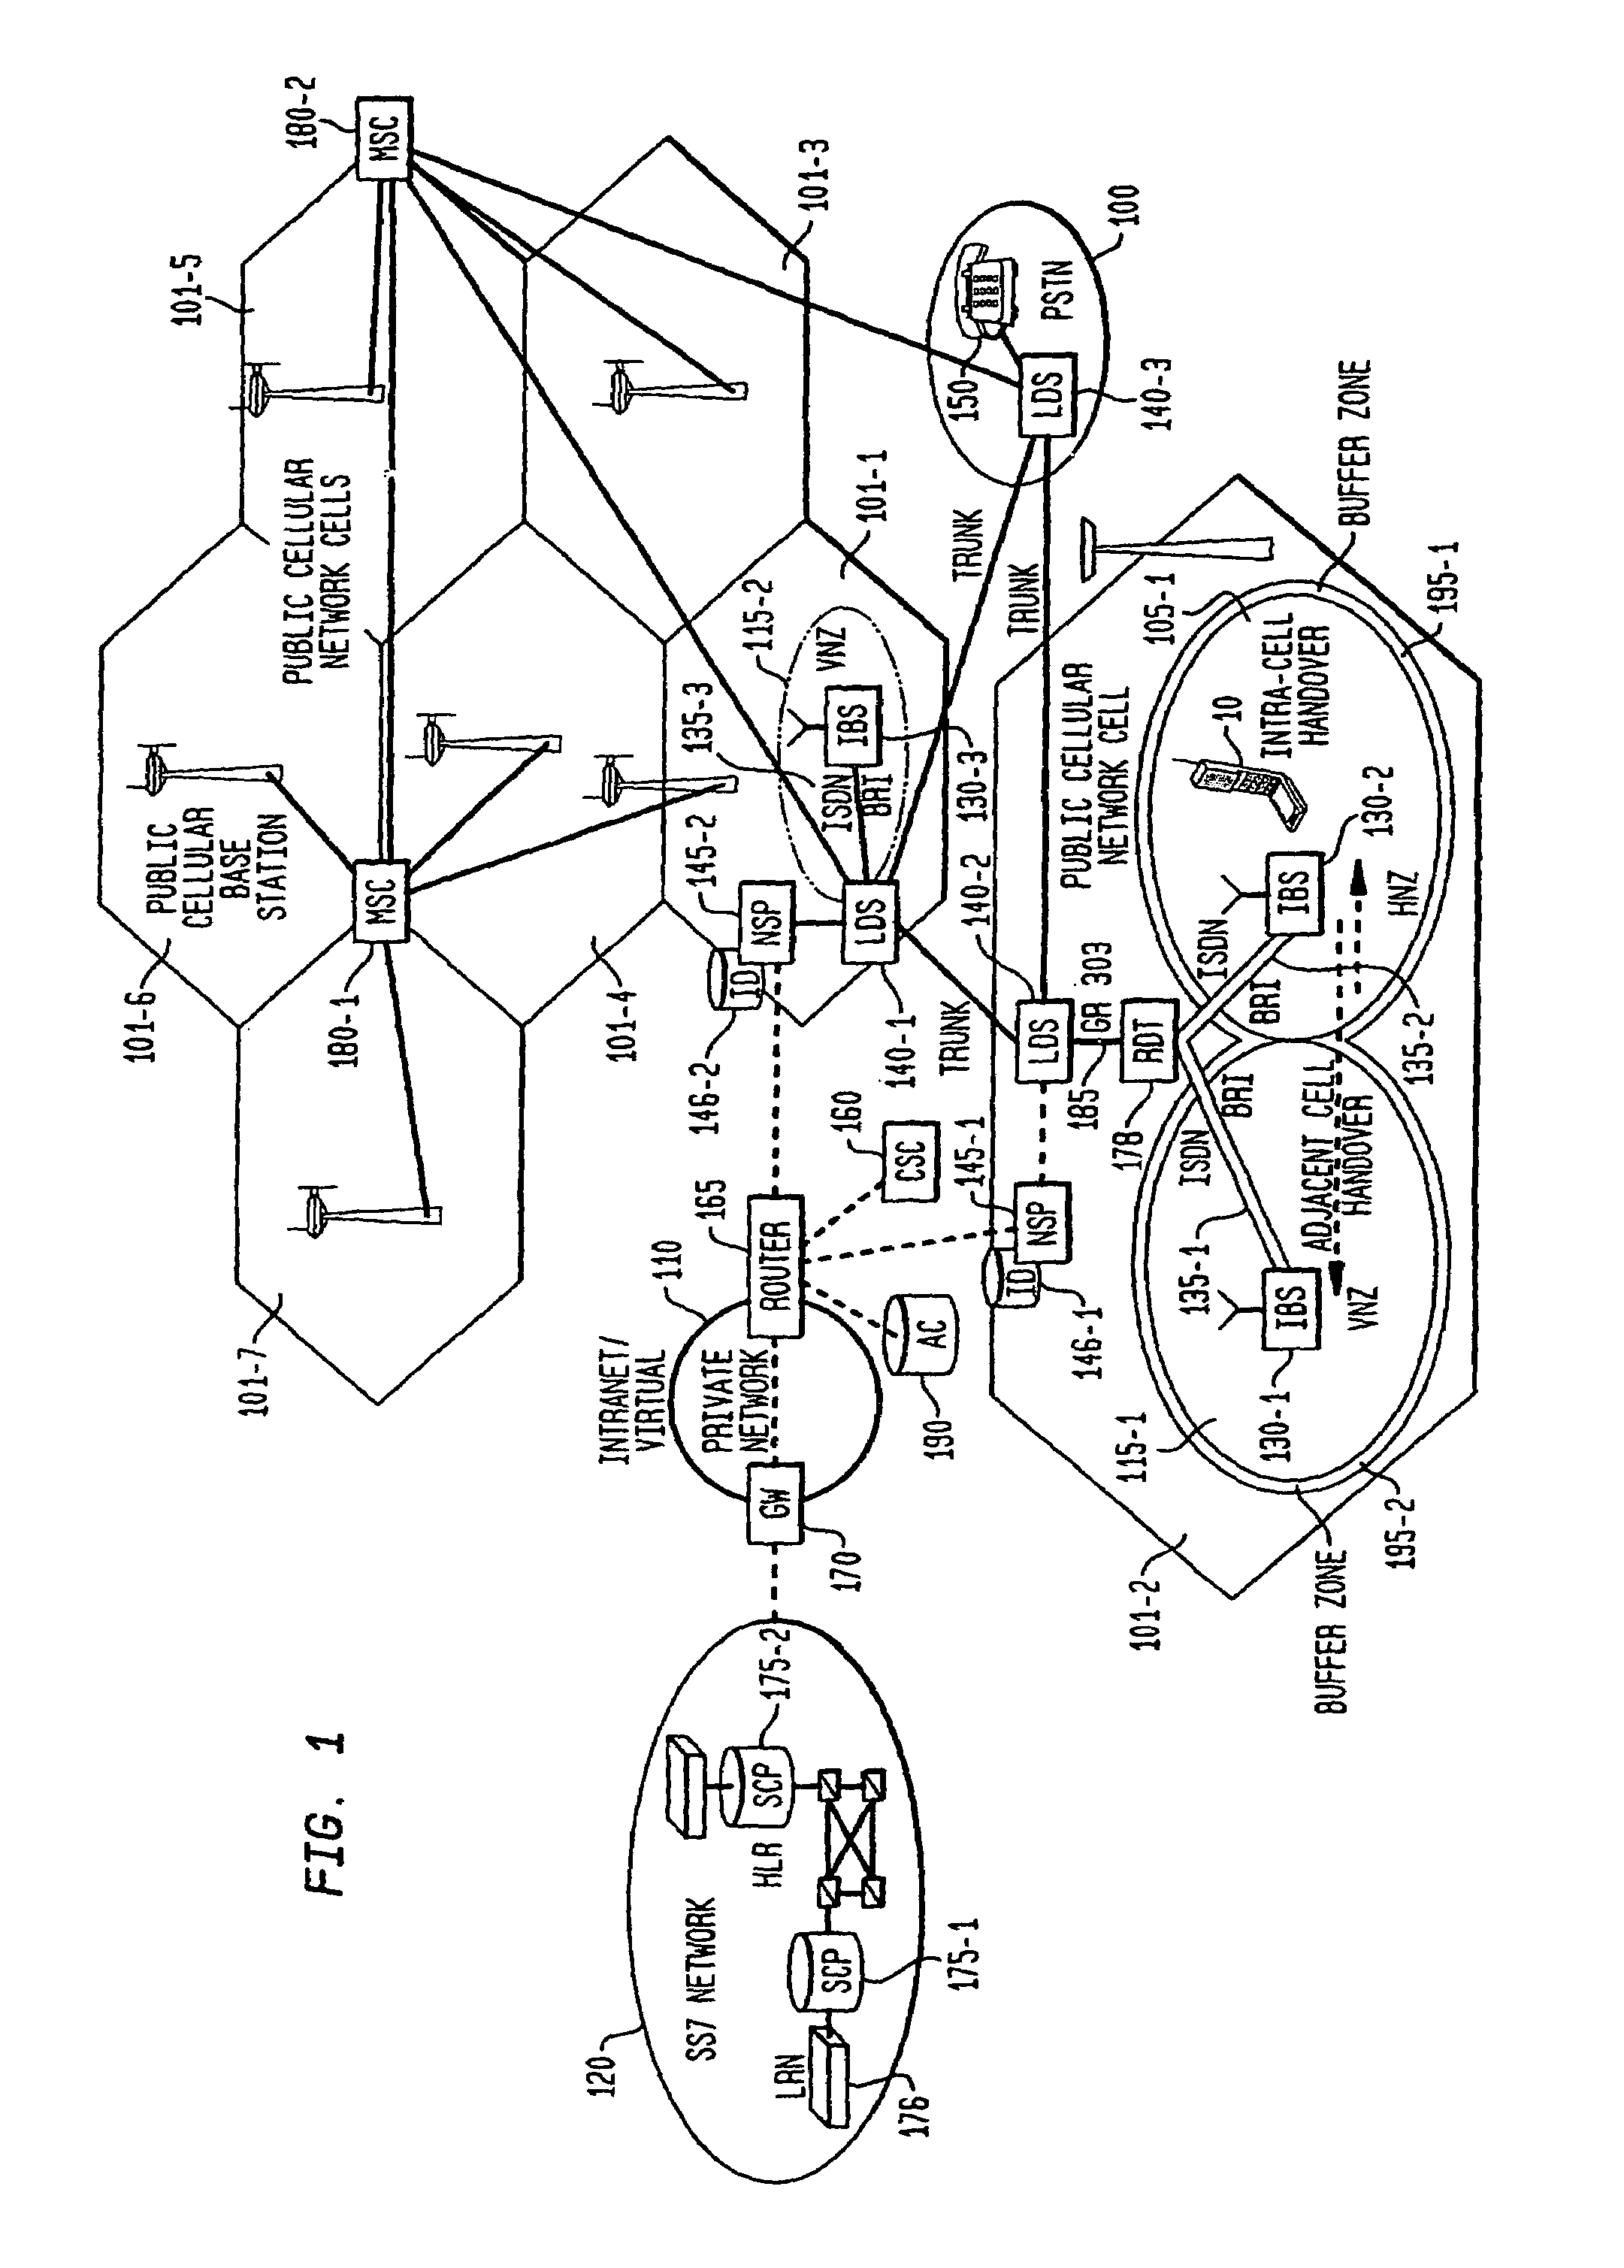 Method and apparatus for over-the-air activation of neighborhood cordless-type services